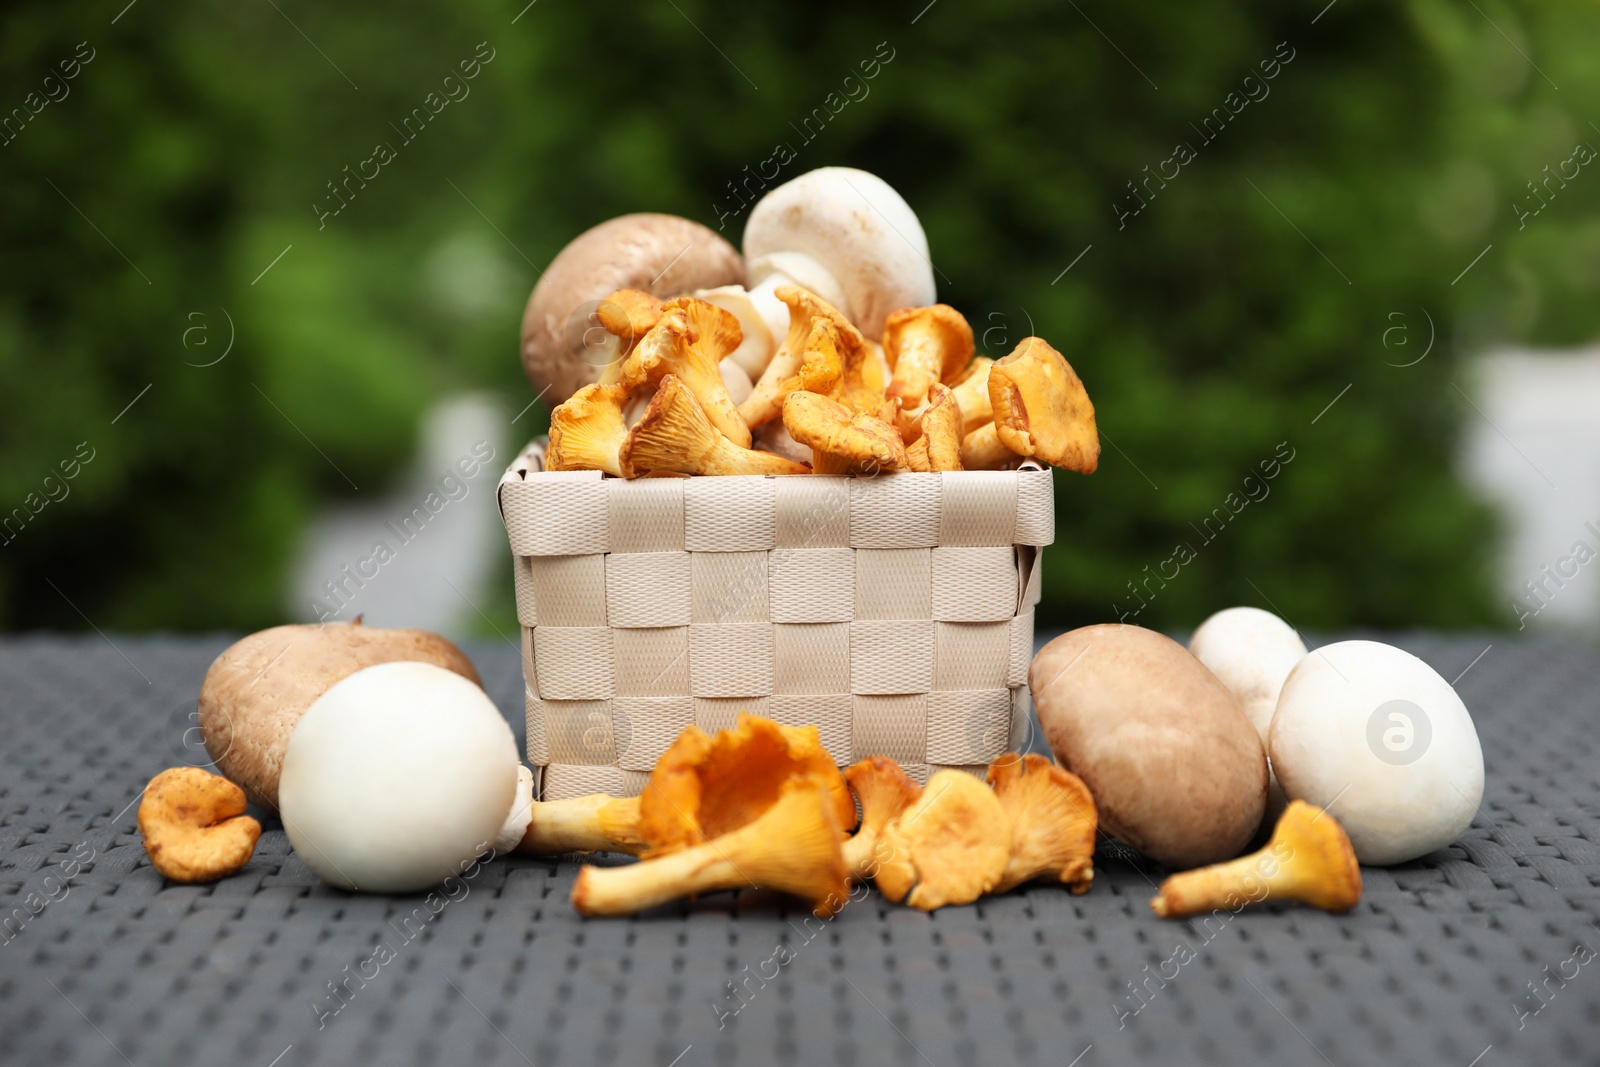 Photo of Different fresh mushrooms and basket on grey rattan table outdoors